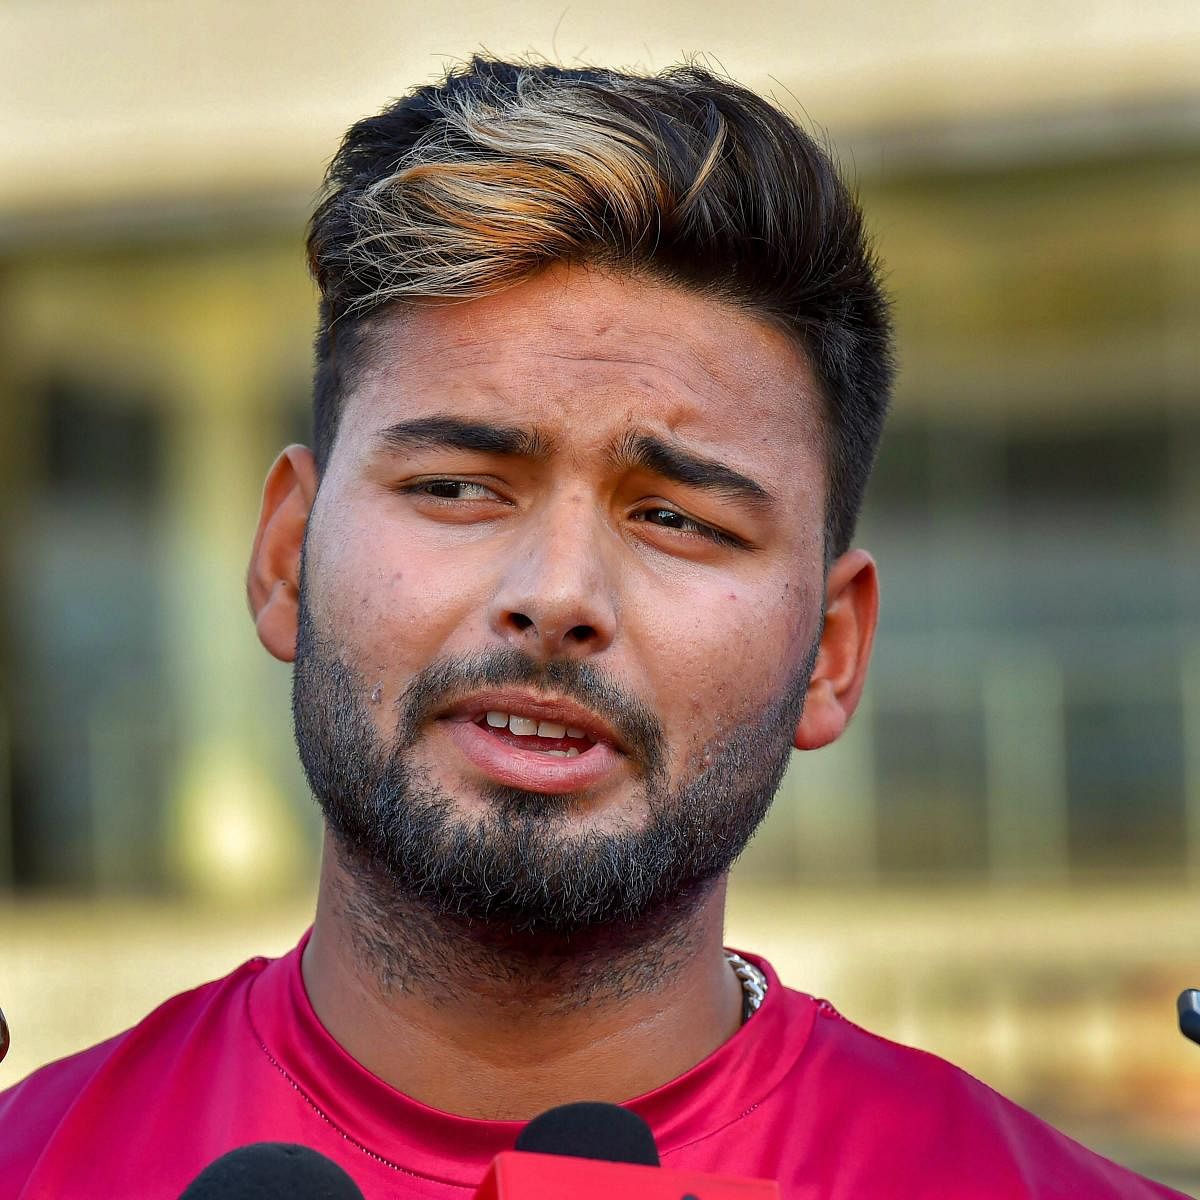 Back in the Indian team as a replacement following the injury to Shikhar Dhawan, young wicketkeeper-batsman Rishabh Pant Friday said he remained positive despite being ignored from the World Cup squad. (PTI File Photo)